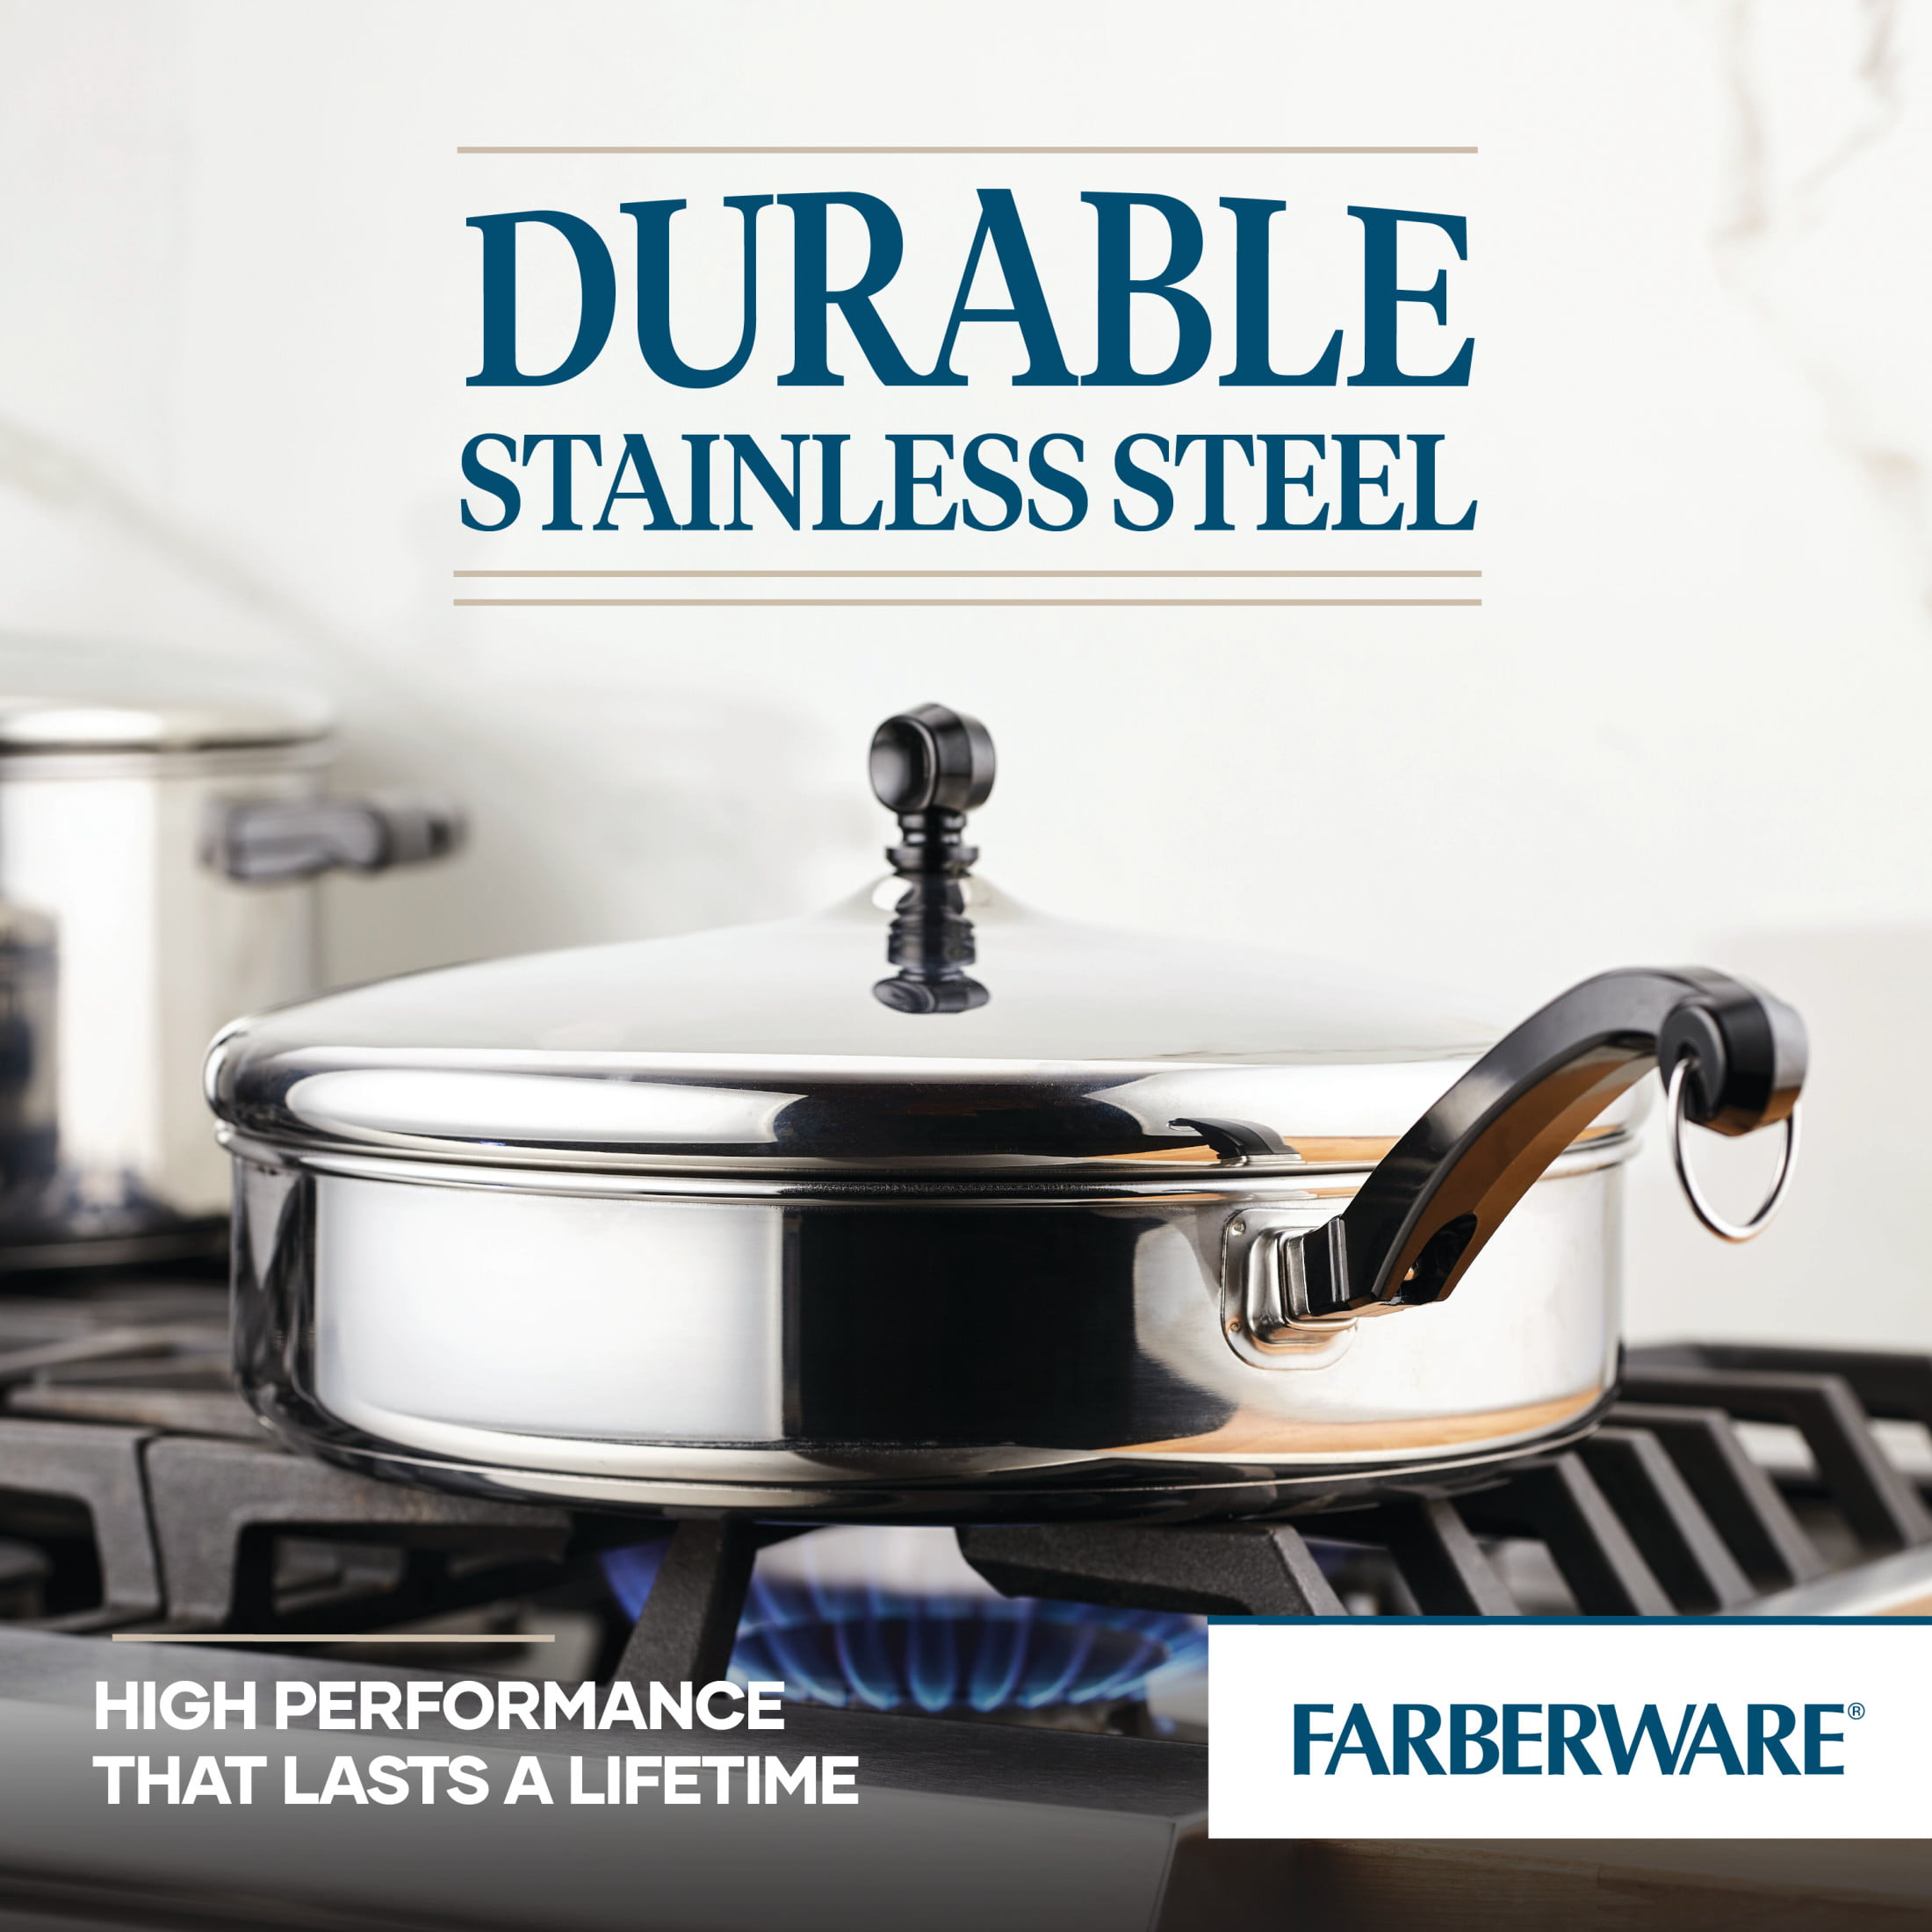 Farberware Classic Series Stainless Steel 2-3/4-Quart Covered Sautテδゥ Pan  by Farberware